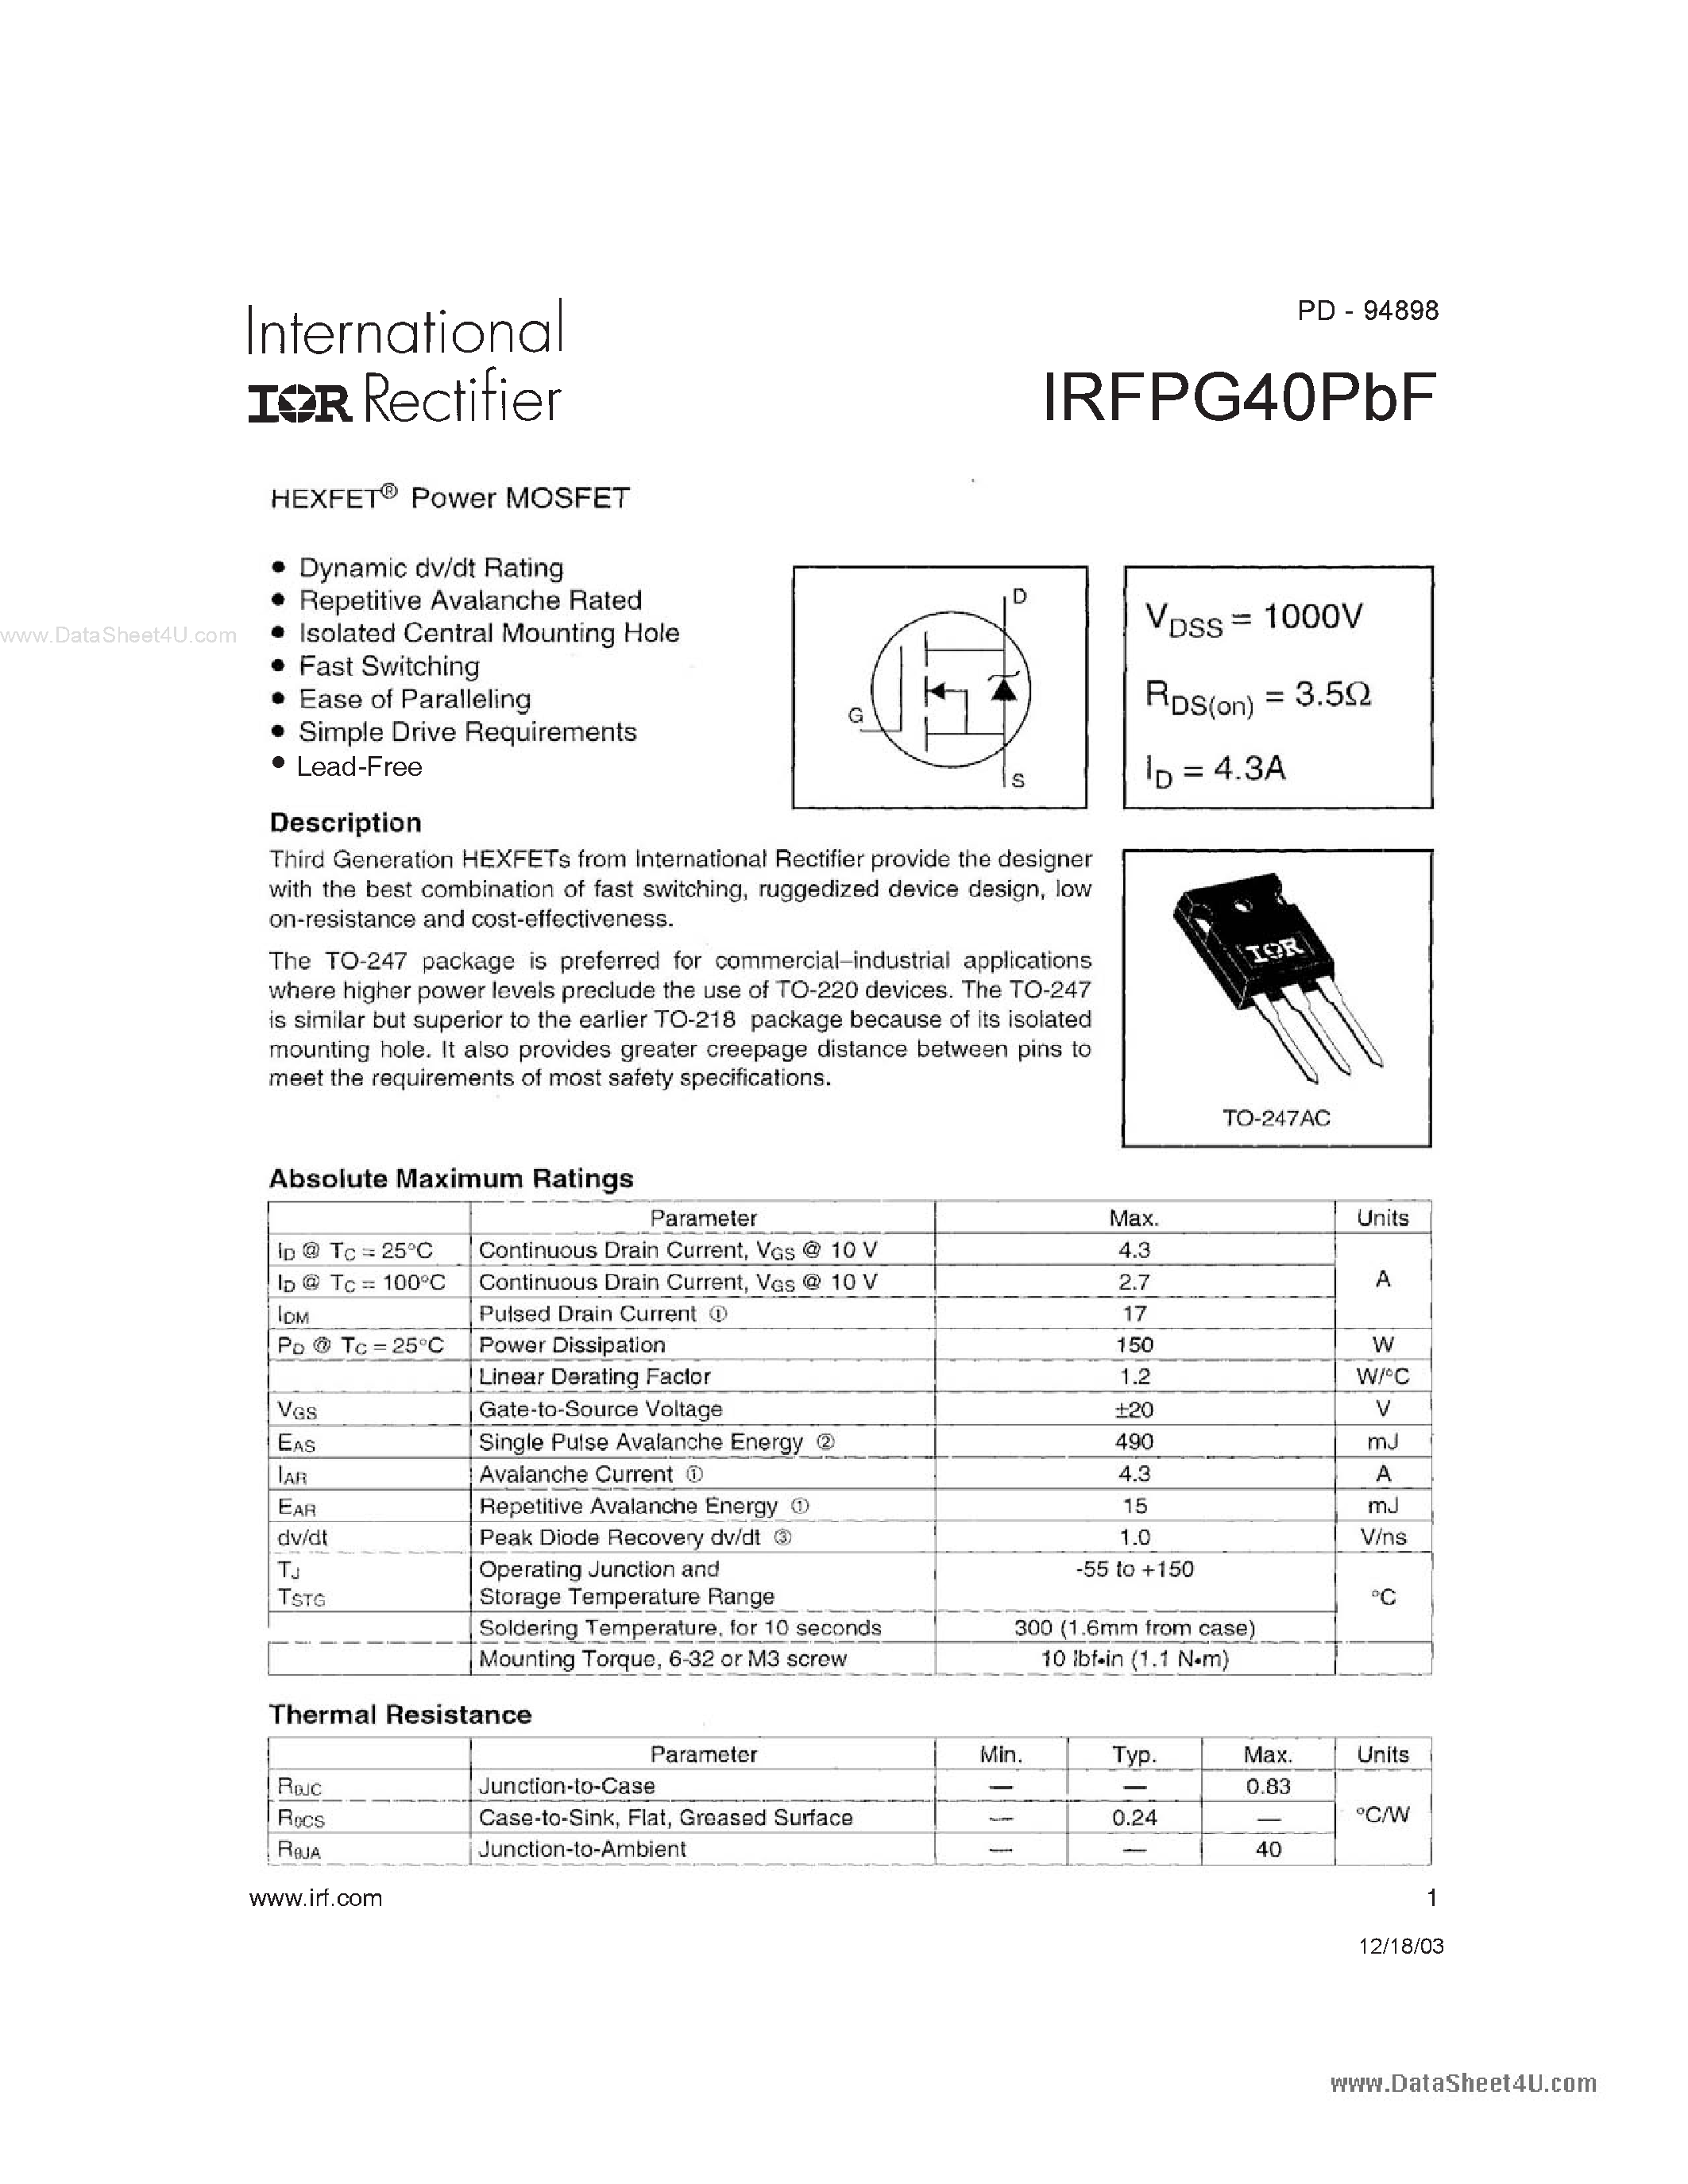 Datasheet IRFPG40PBF - HEXFET POWER MOSFET page 1